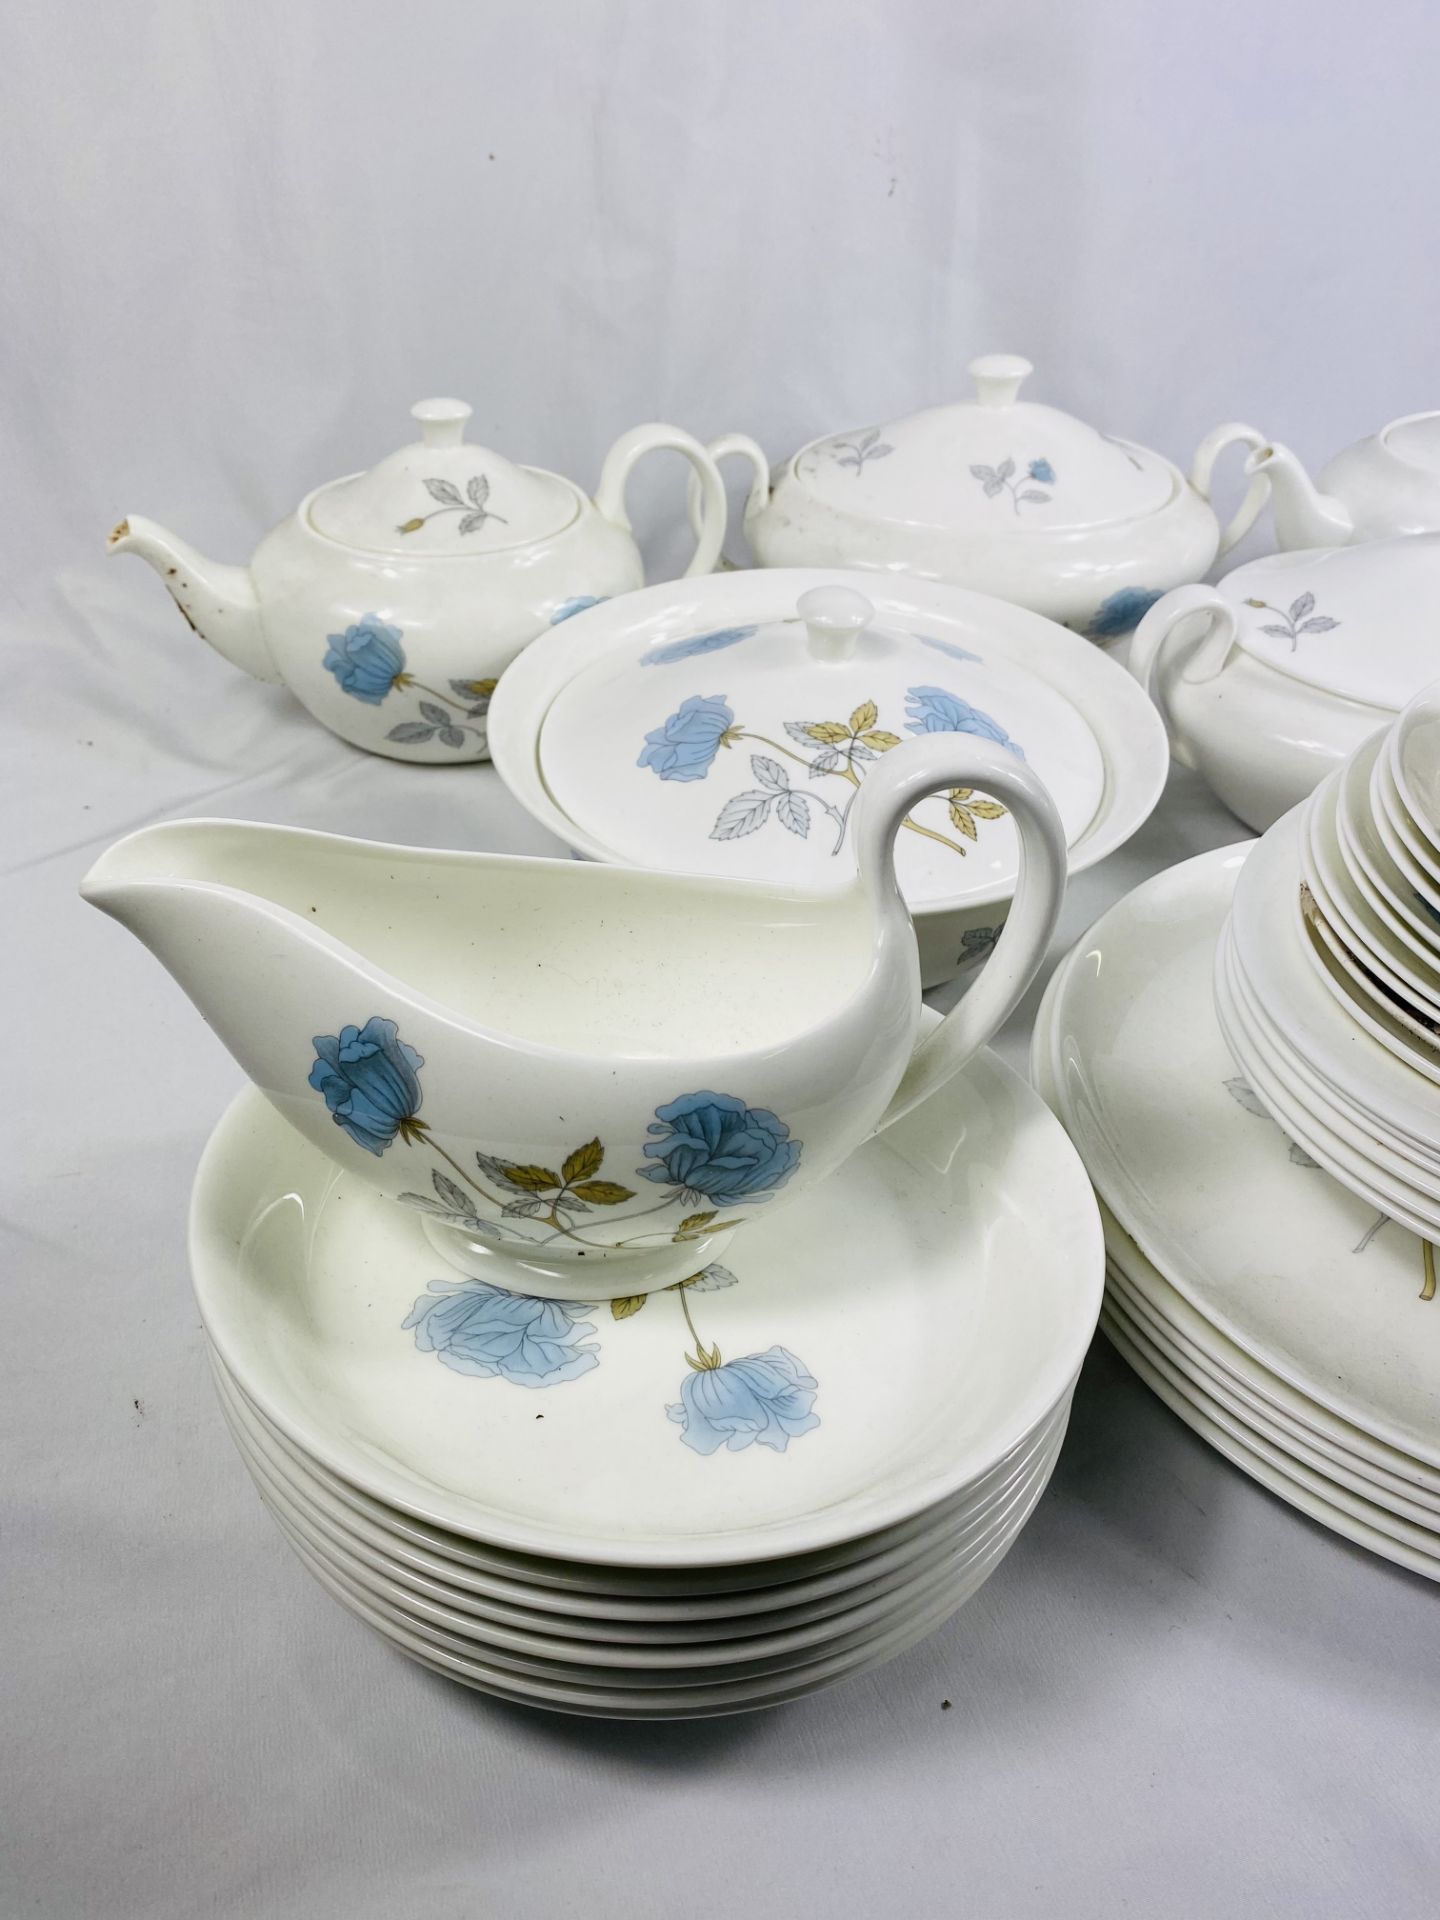 Wedgwood Ice Rose part dinner service - Image 6 of 6